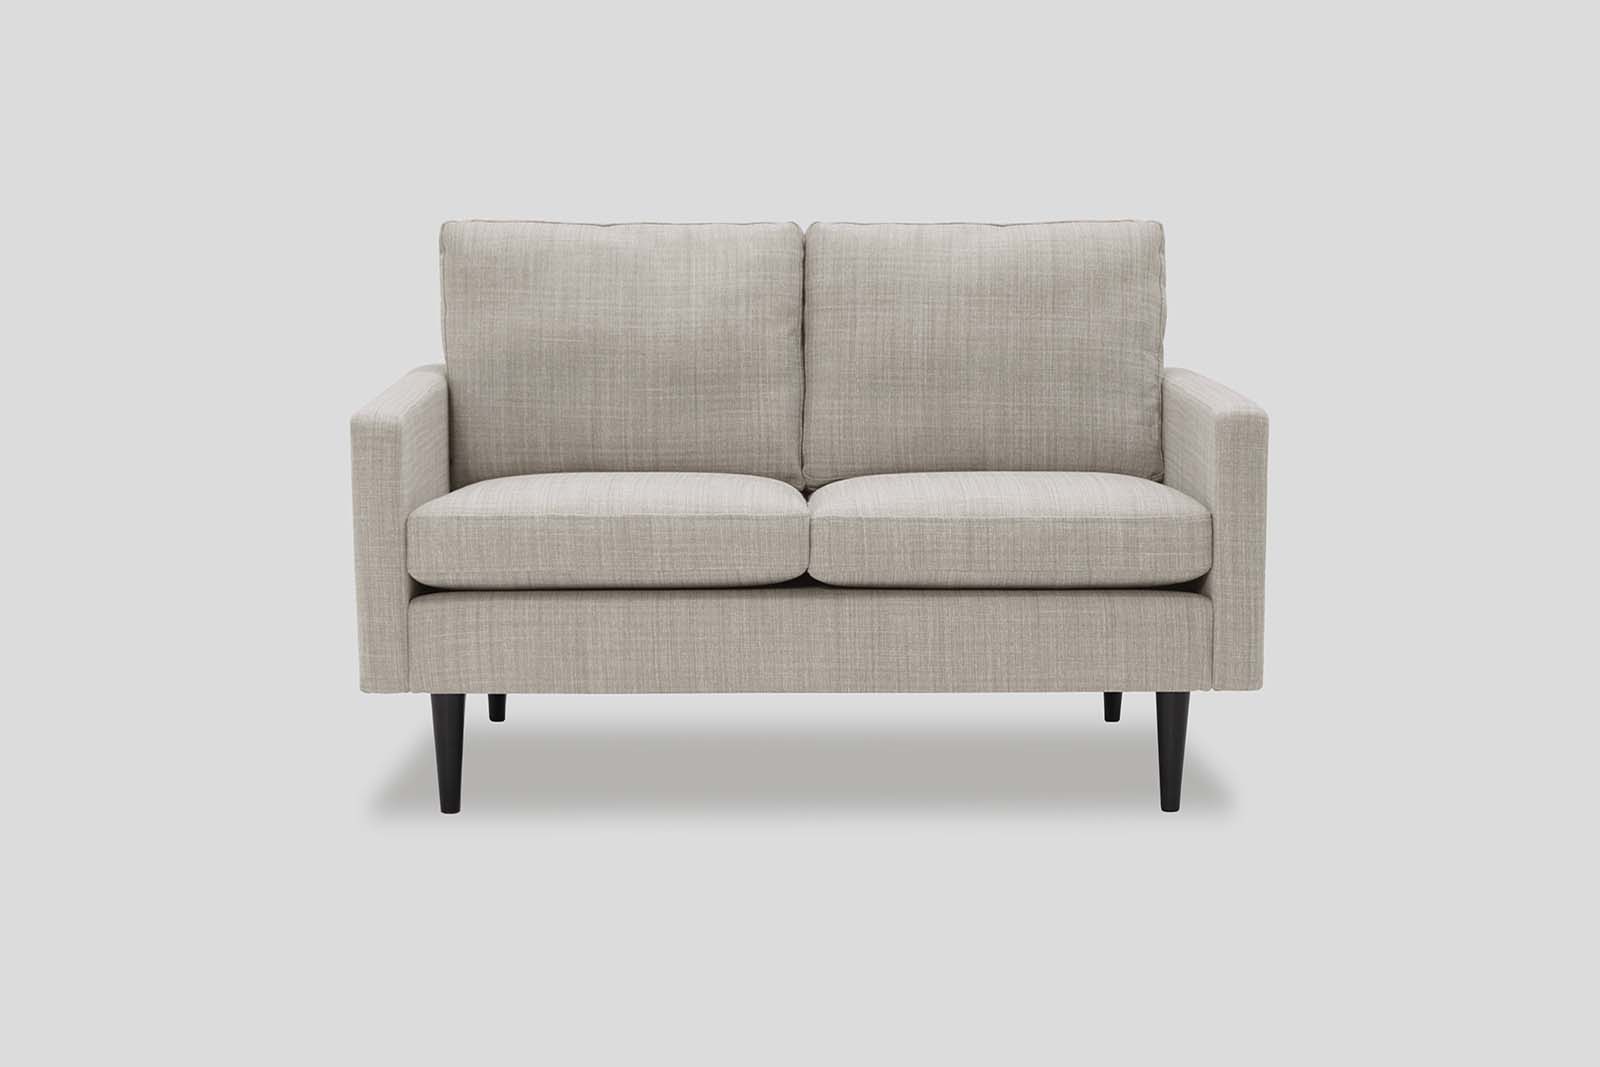 HB01-2-seater-sofa-coconut-front-treacle